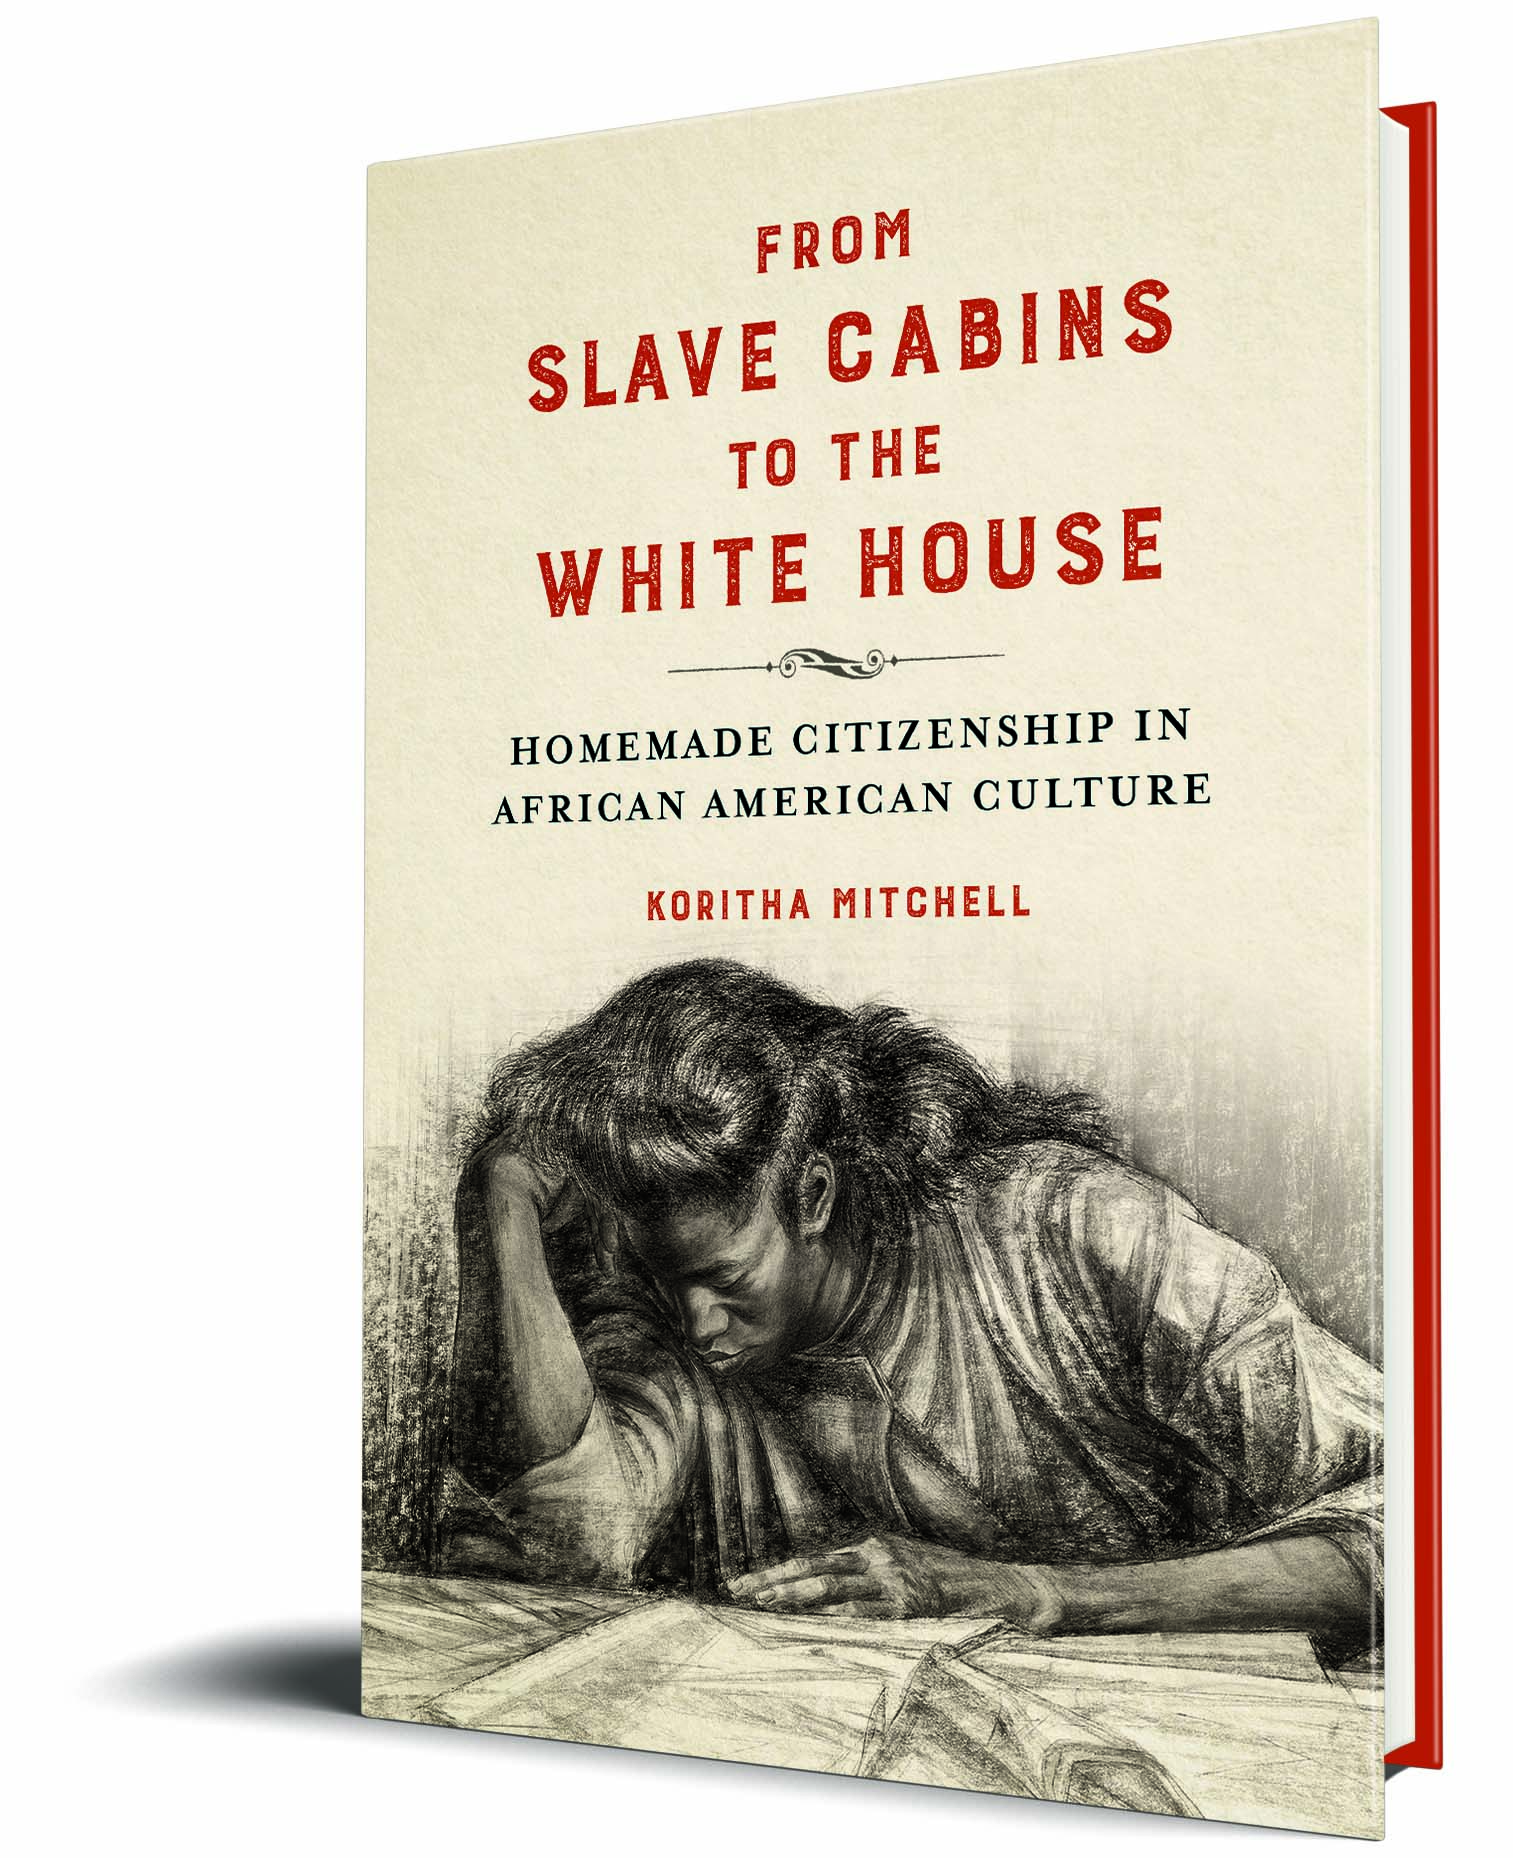 From Slave Cabins to the White House